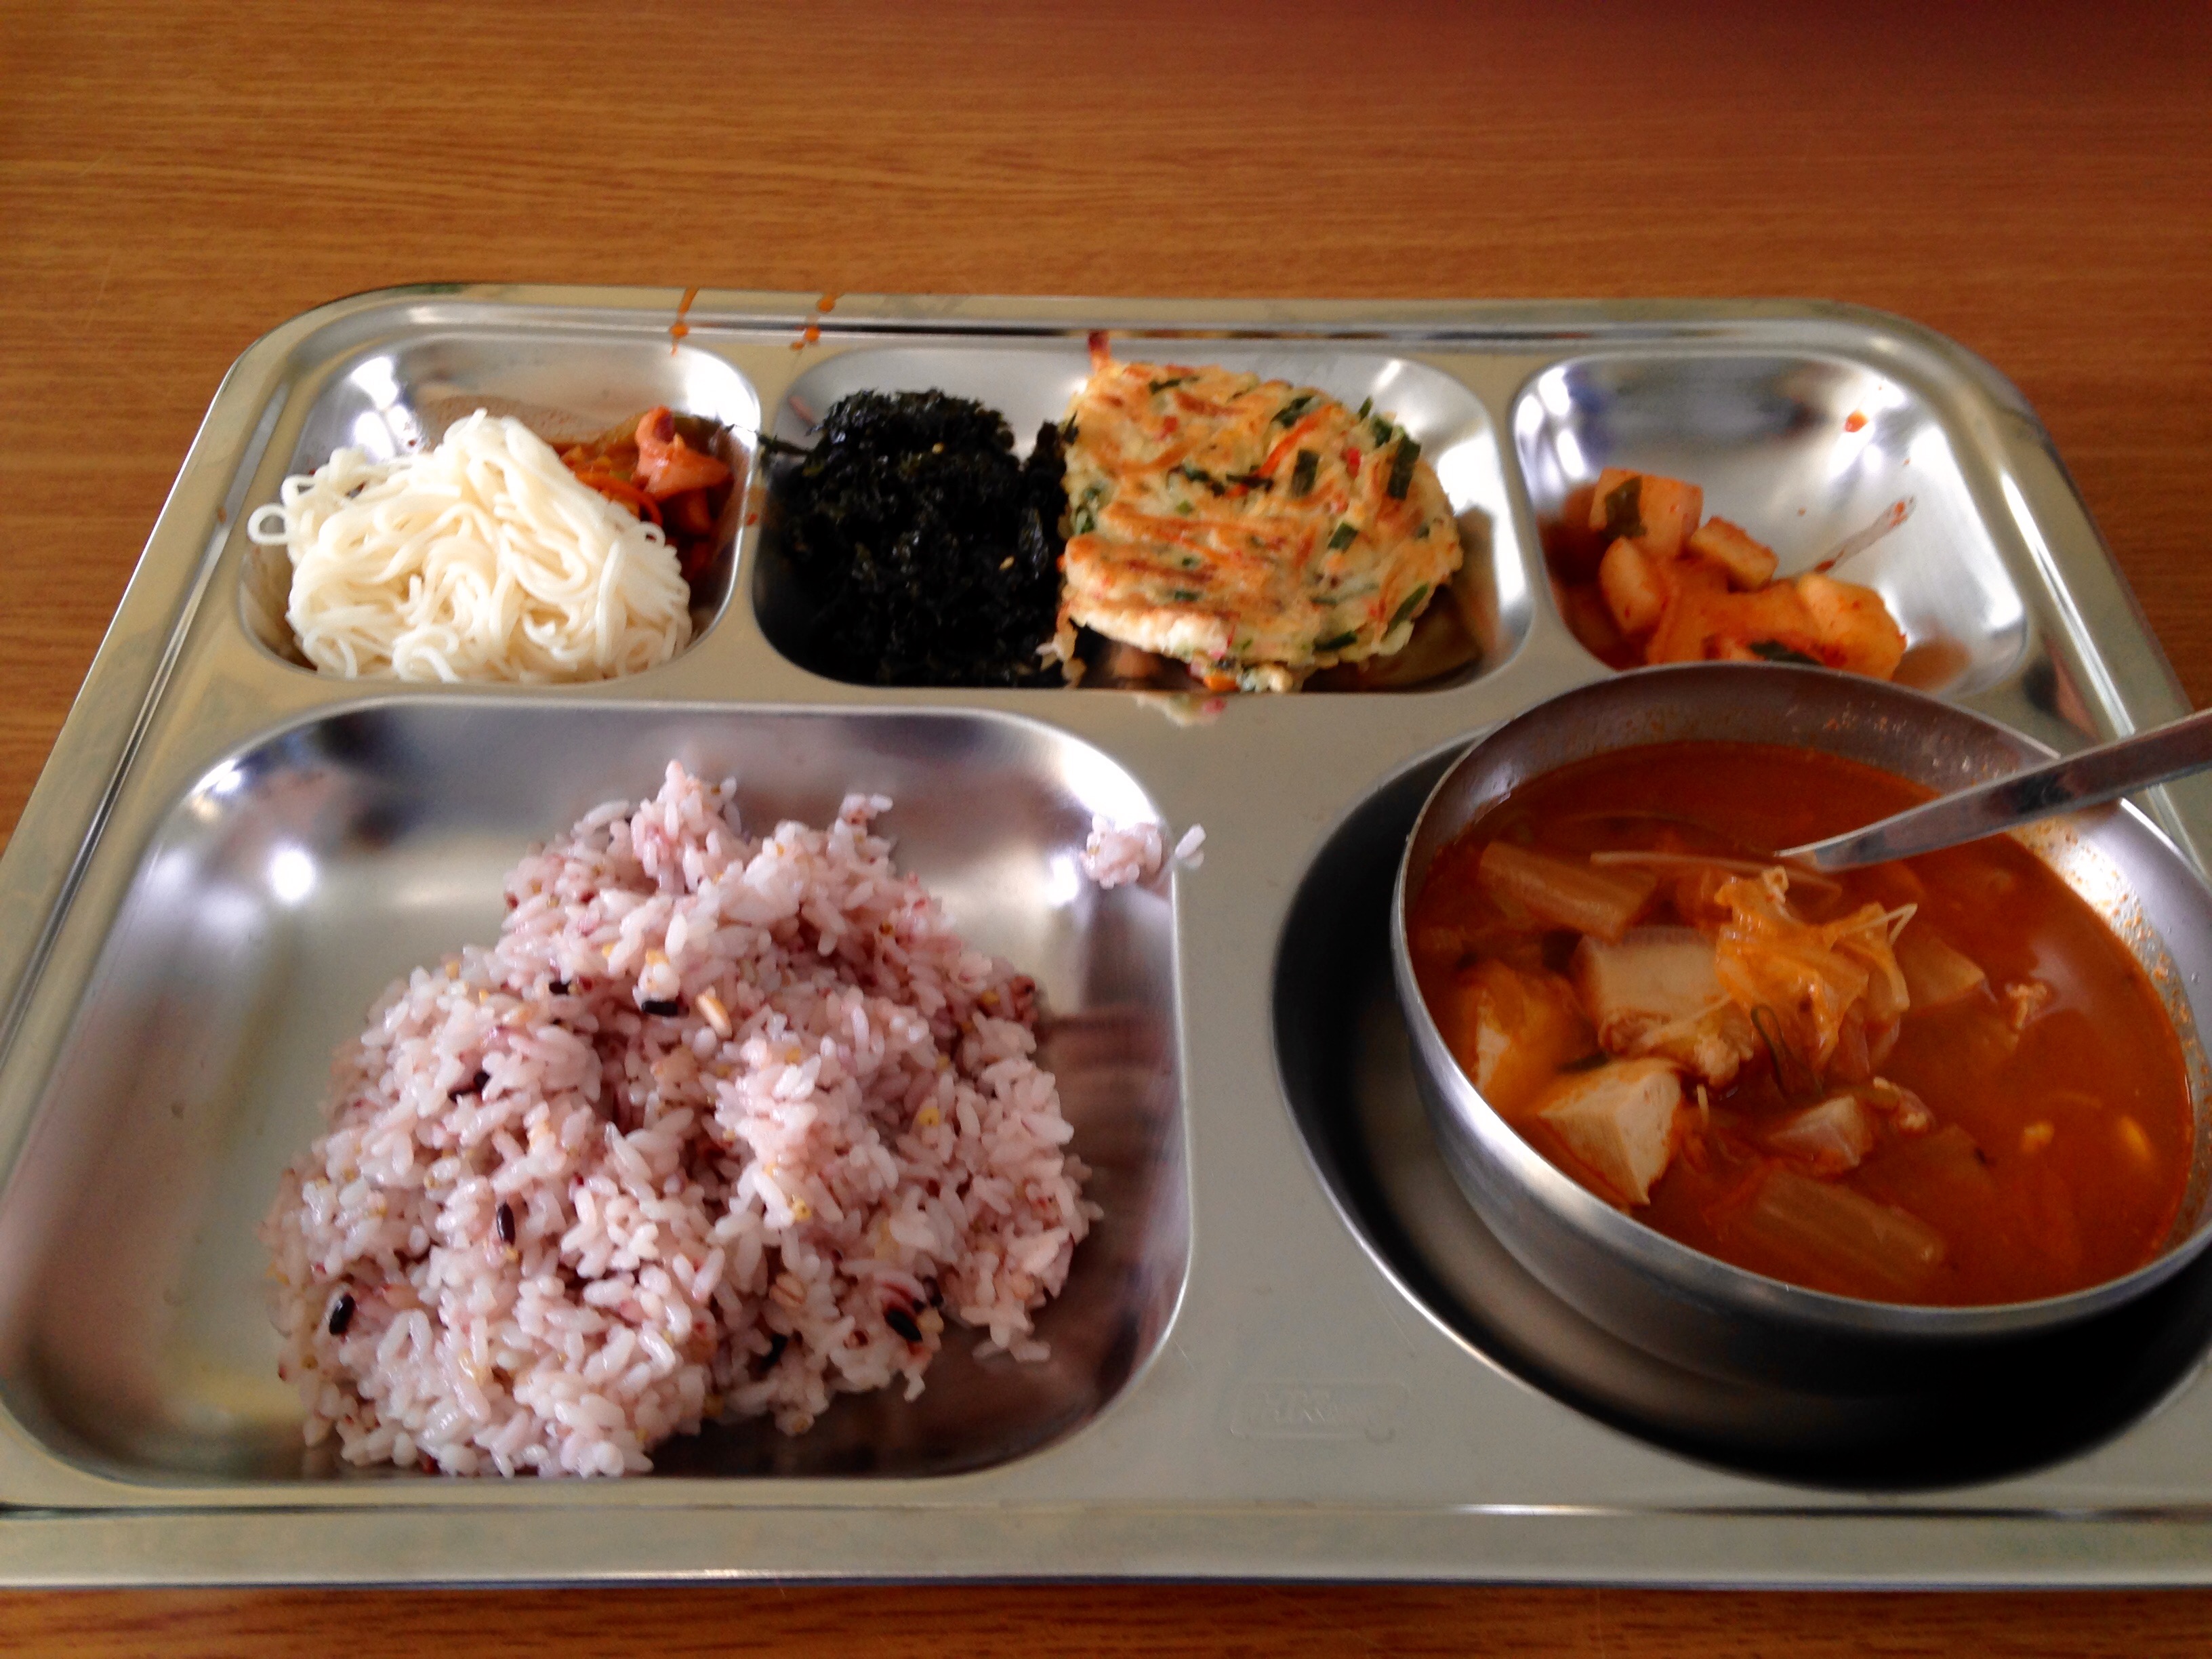 School Lunches in South Korea | HuffPost Life